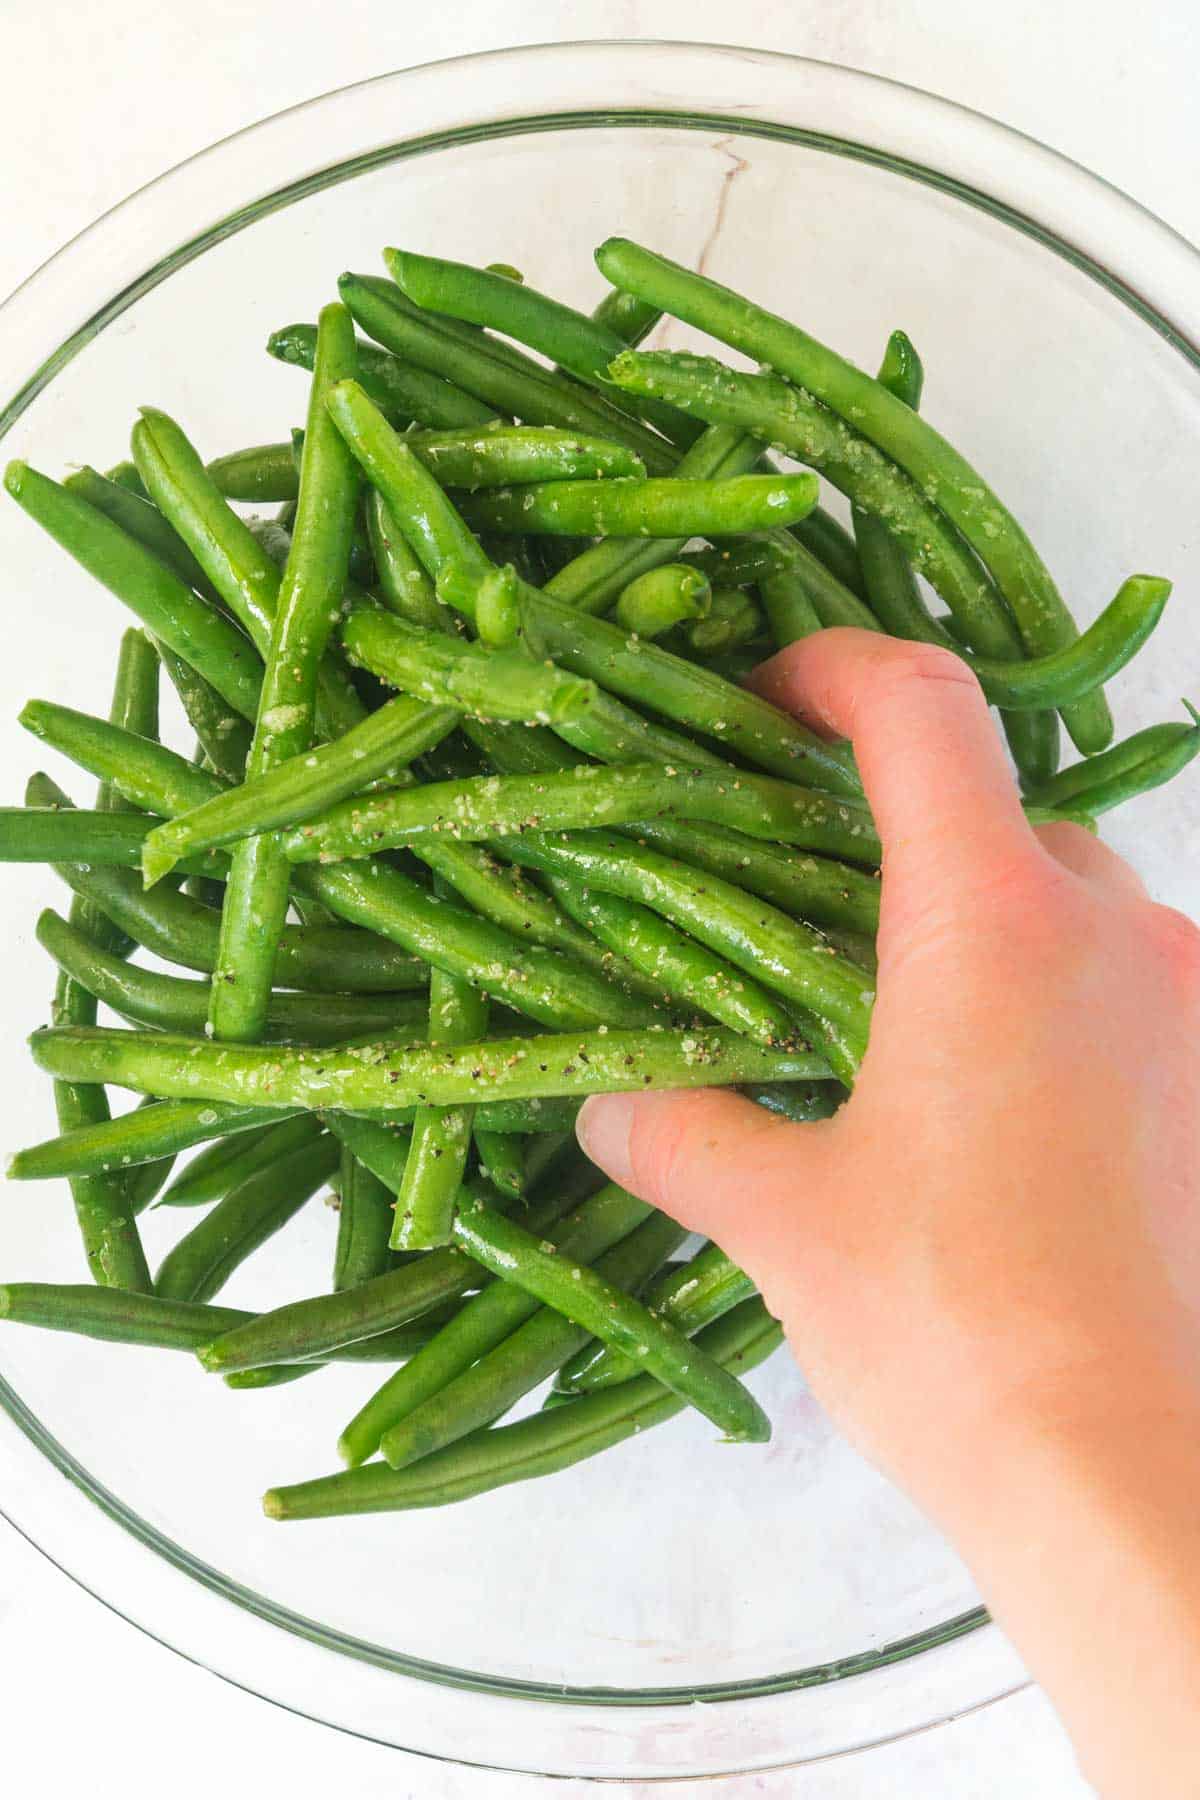 tossing green beans with salt and pepper